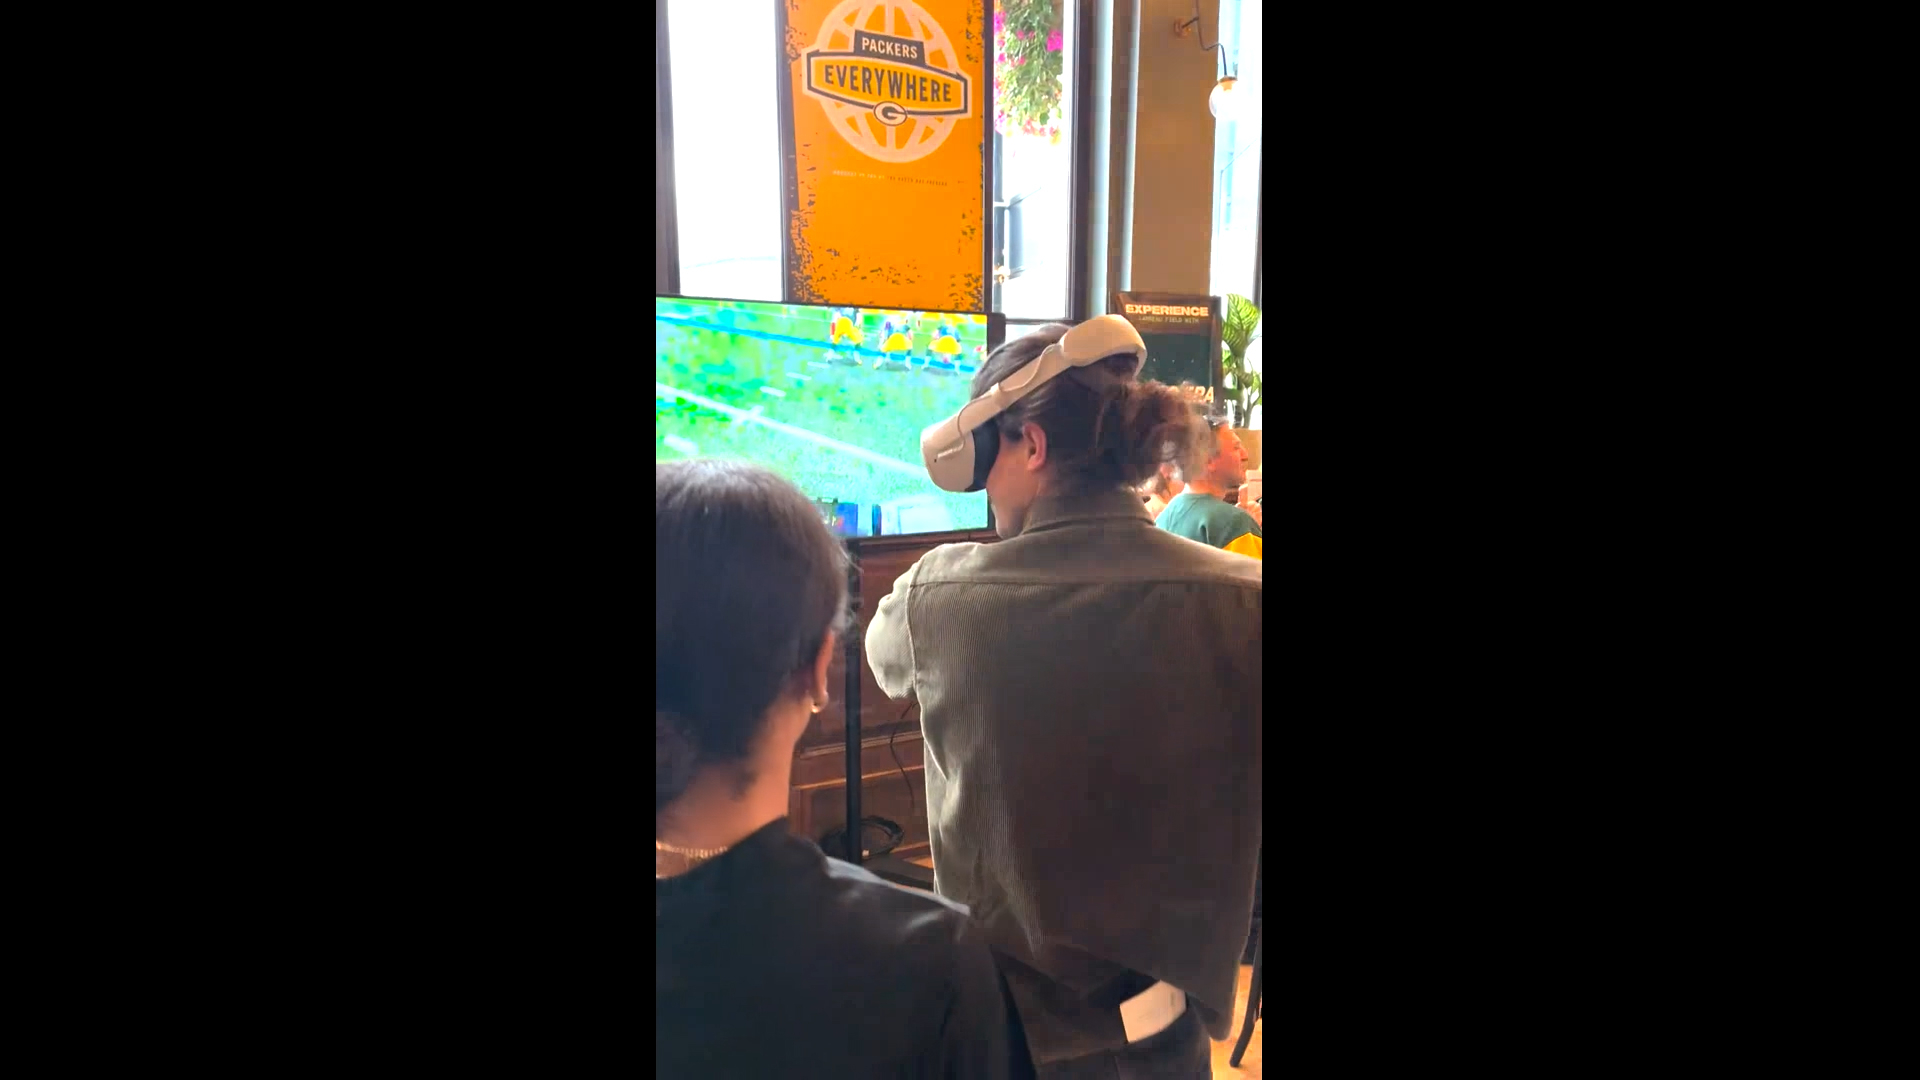 Packers fans demo NFL PRO ERA at a London-based bar prior to the Packers-Giants matchup, courtesy of StatusPRO.